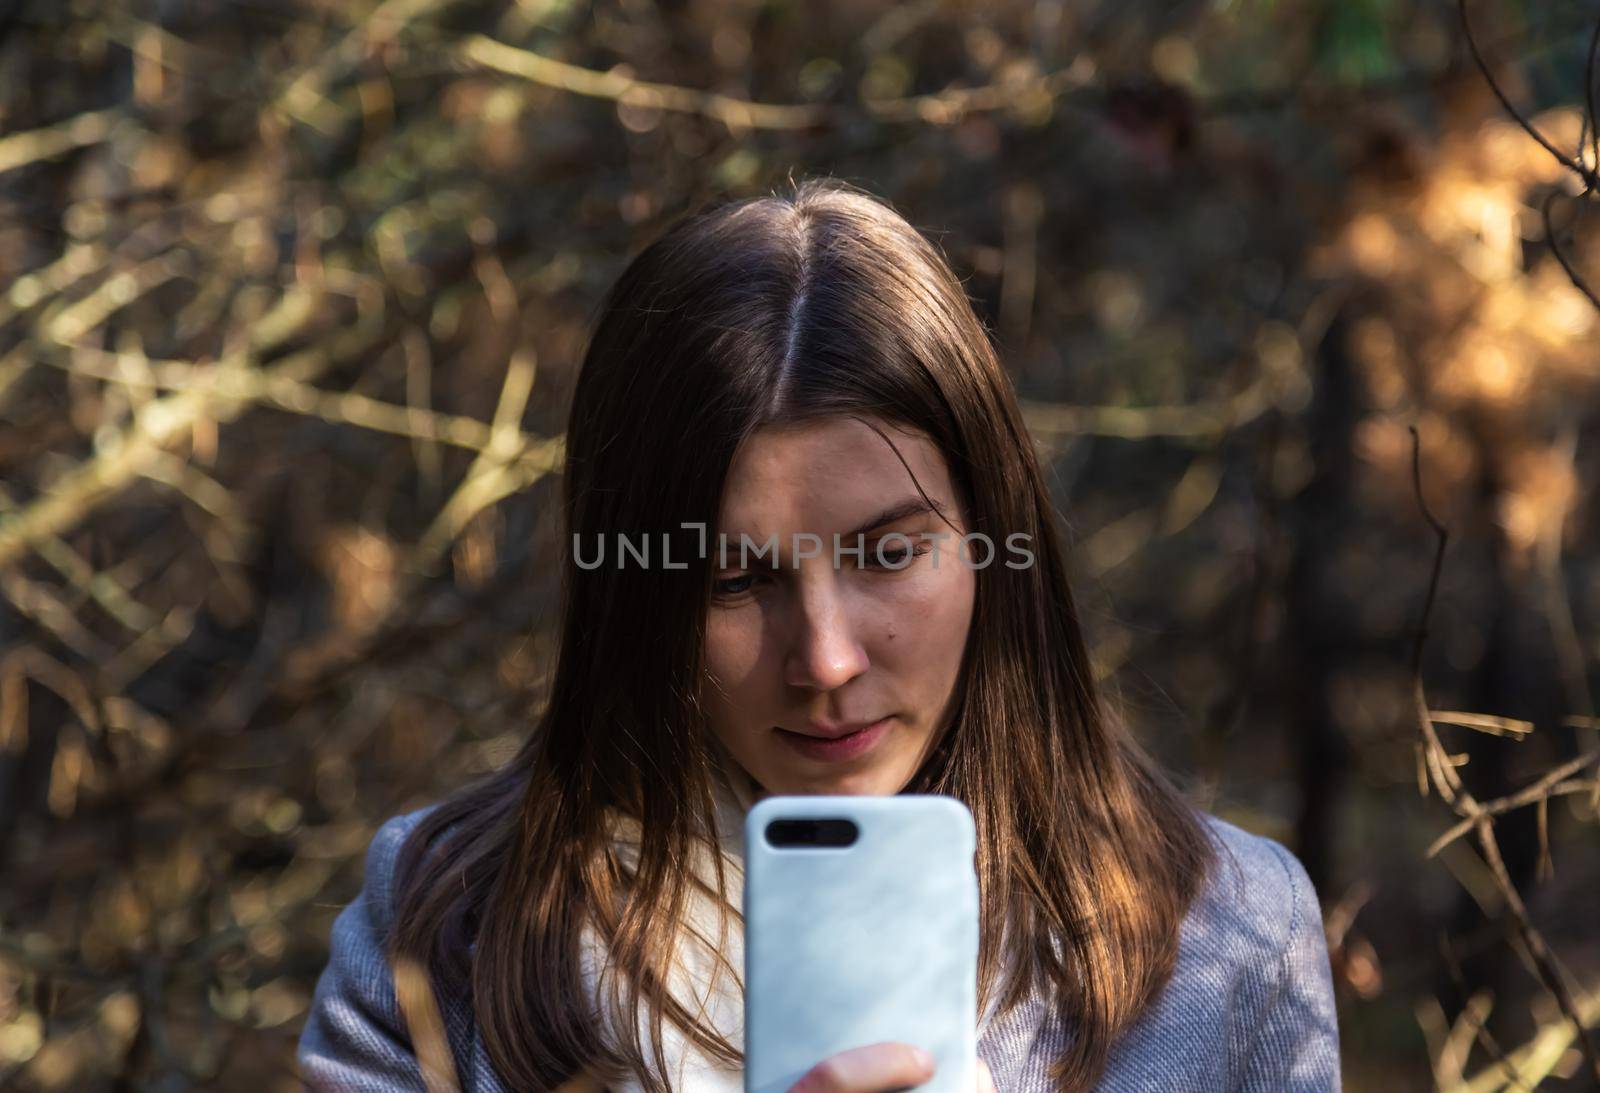 Girl in a gray coat takes a selfie in the forest. Outdoor communication mobile phone.